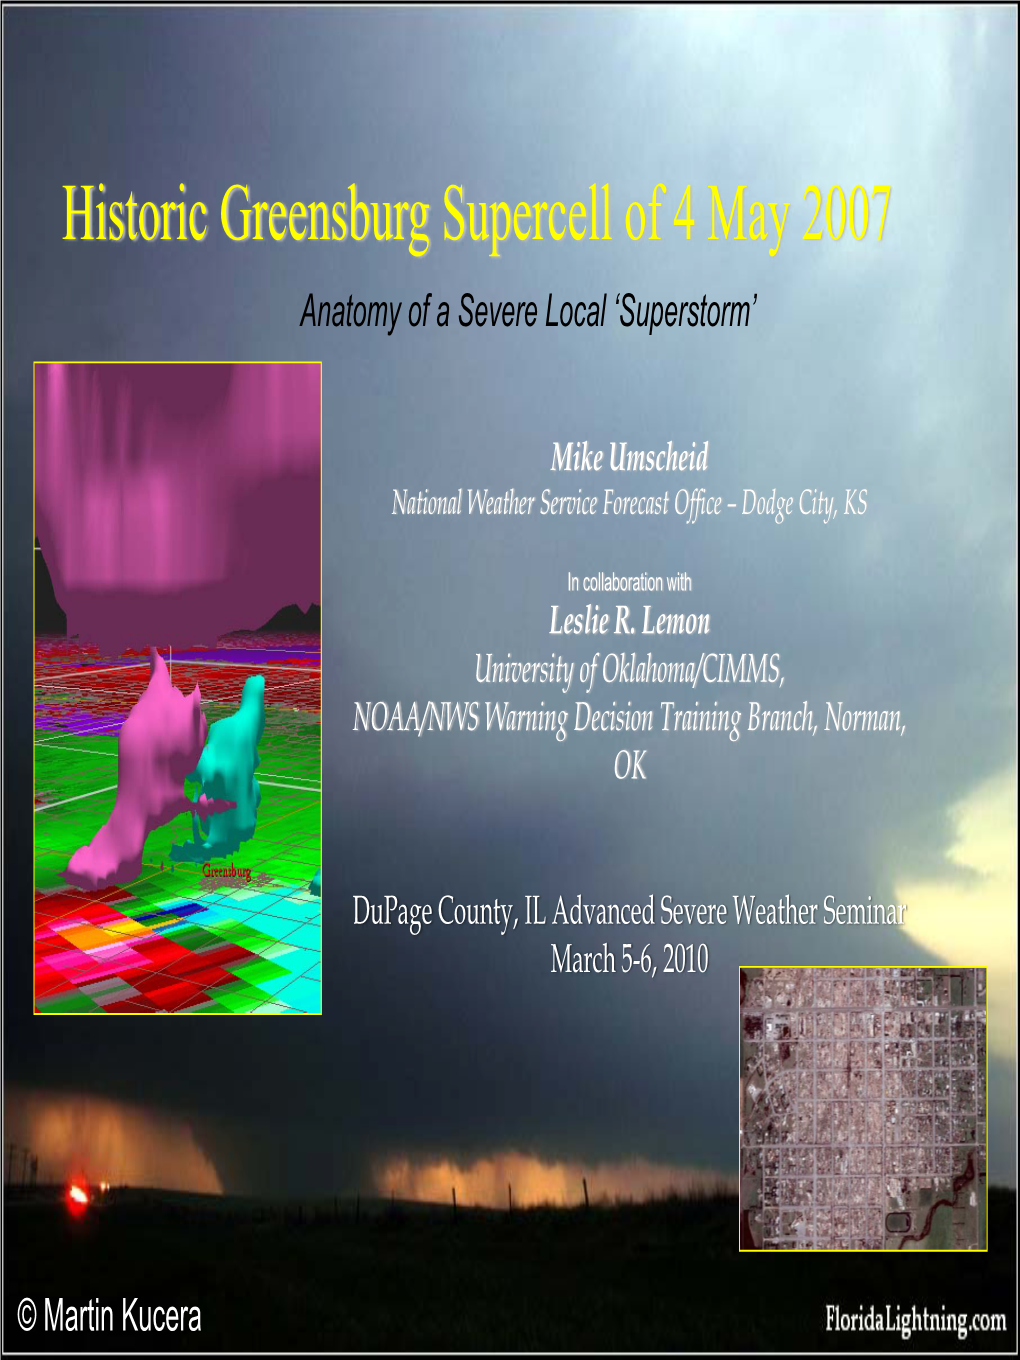 Historic Greensburg Supercell of 4 May 2007 Anatomy of a Severe Local ‘Superstorm’